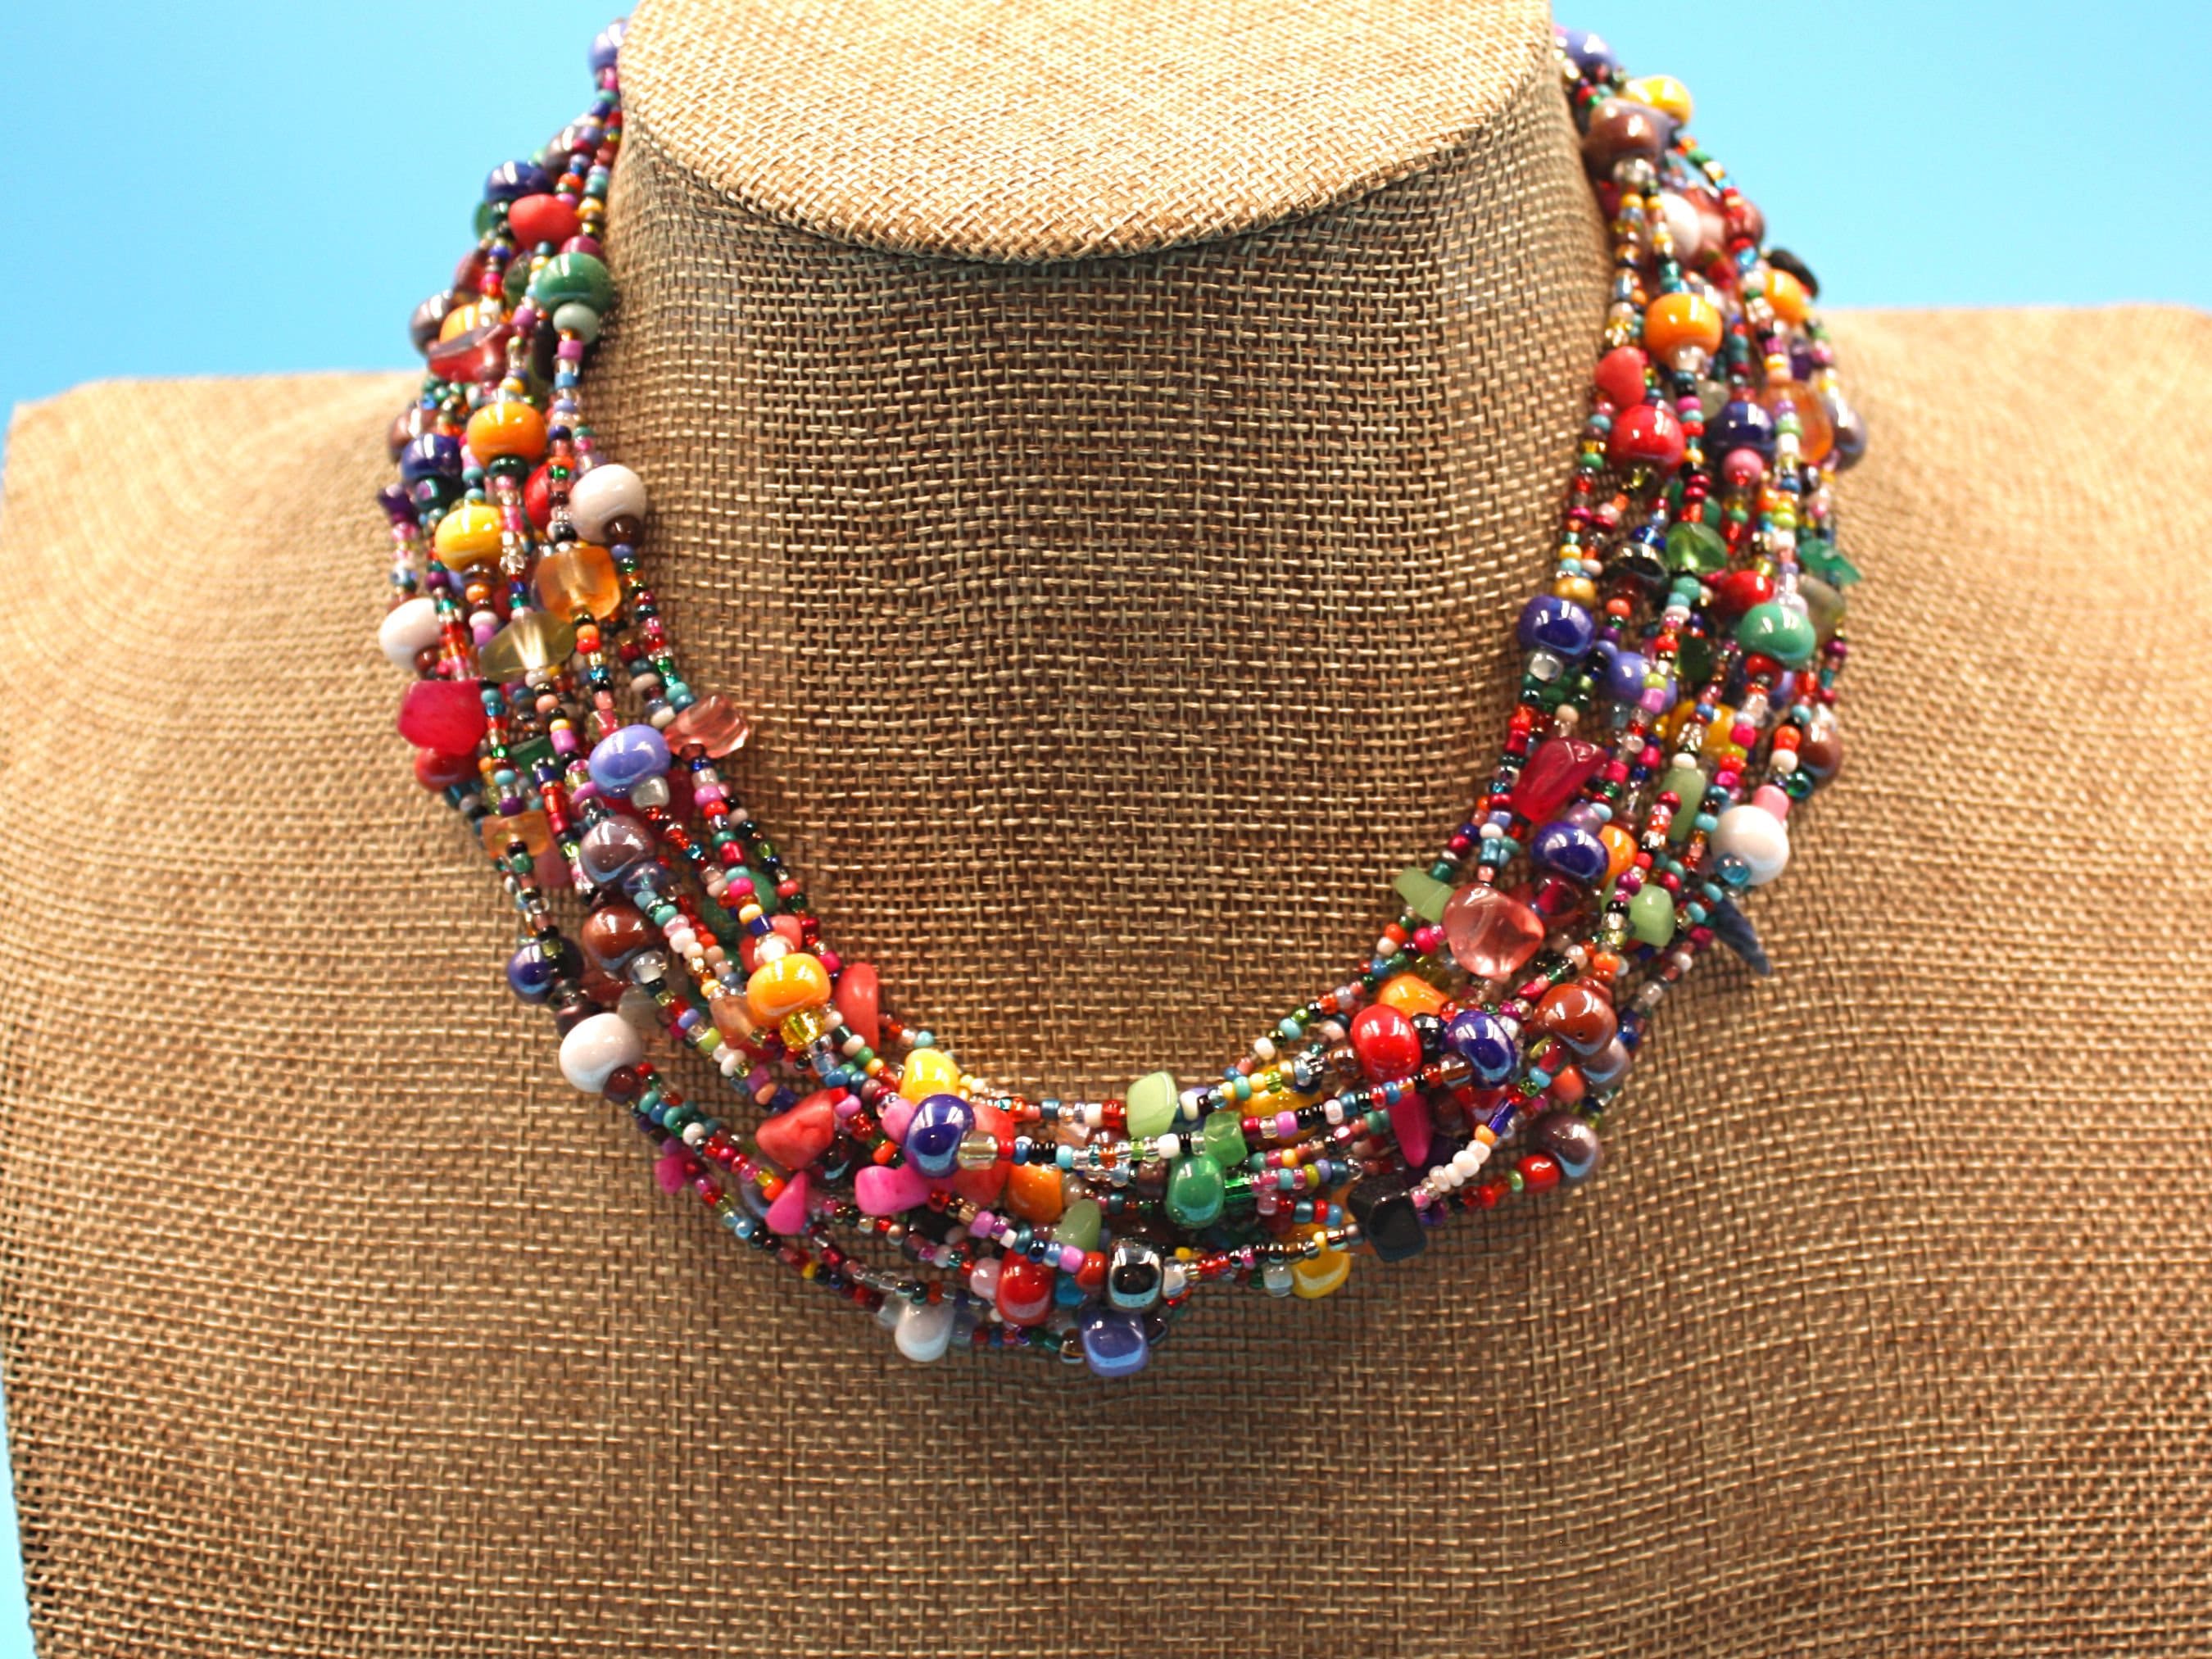 Rainbow Seed Bead 2 Strand Necklace. Double Strand Random Necklace Jewelry.  Made in USA – Just Bead It